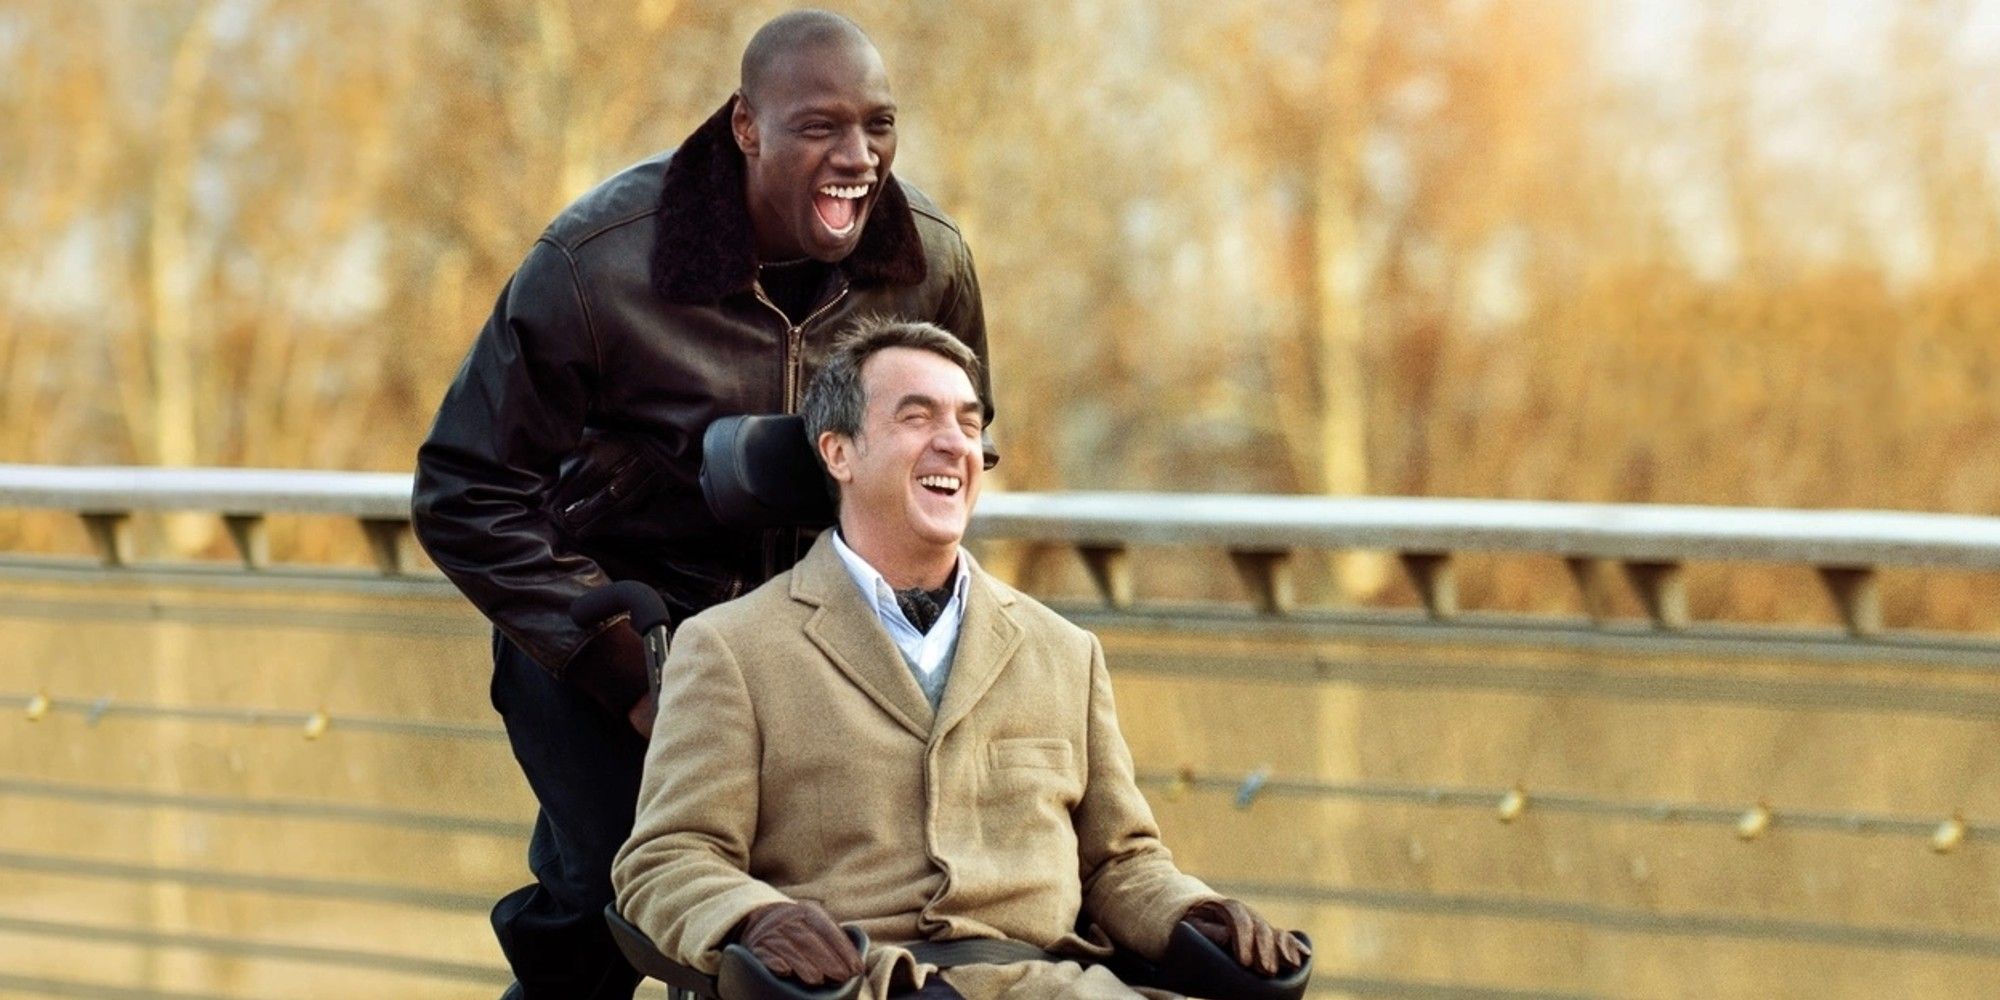 A man pushes another man on a wheelchair as they both laugh in the film The Intouchables.